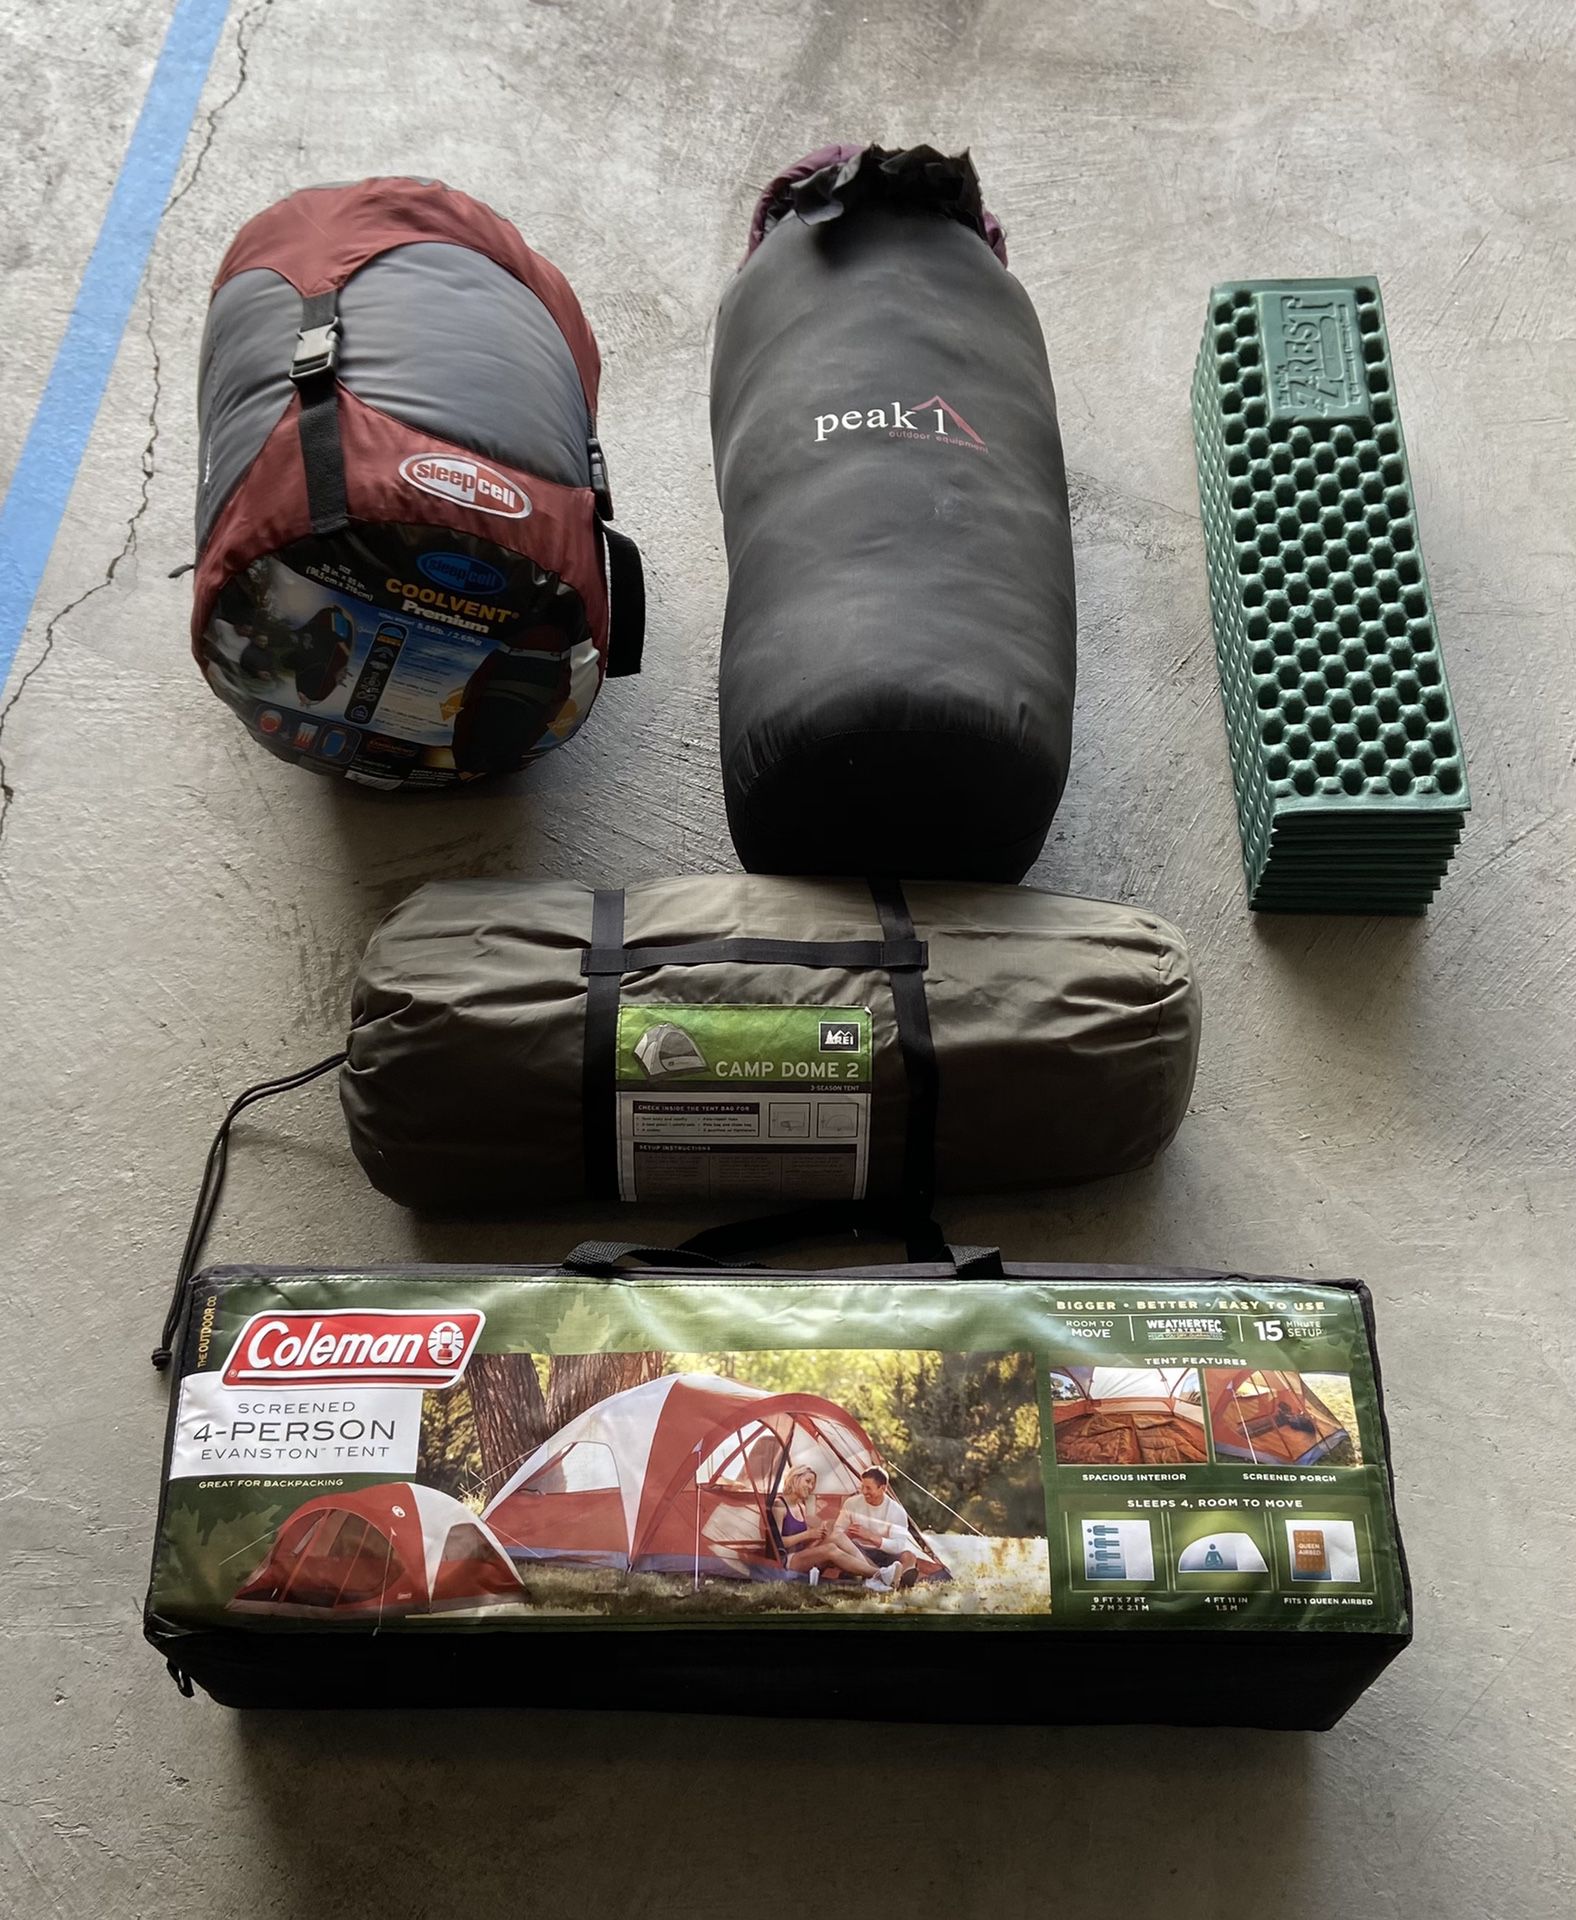 Camping gear: will sell separately or as a bundle